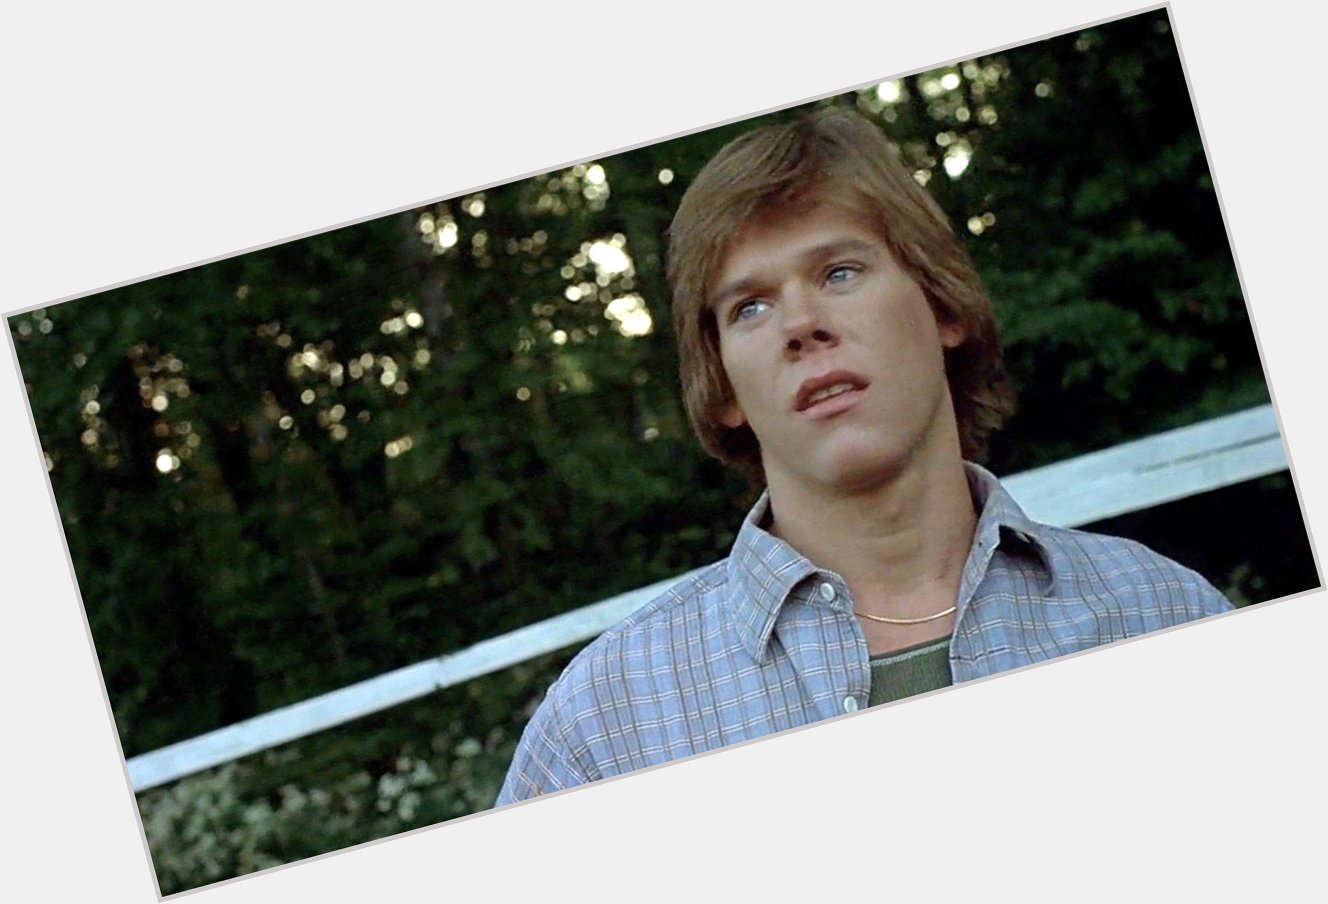  Happy birthday to Kevin Bacon who was born on July 8, 1958 